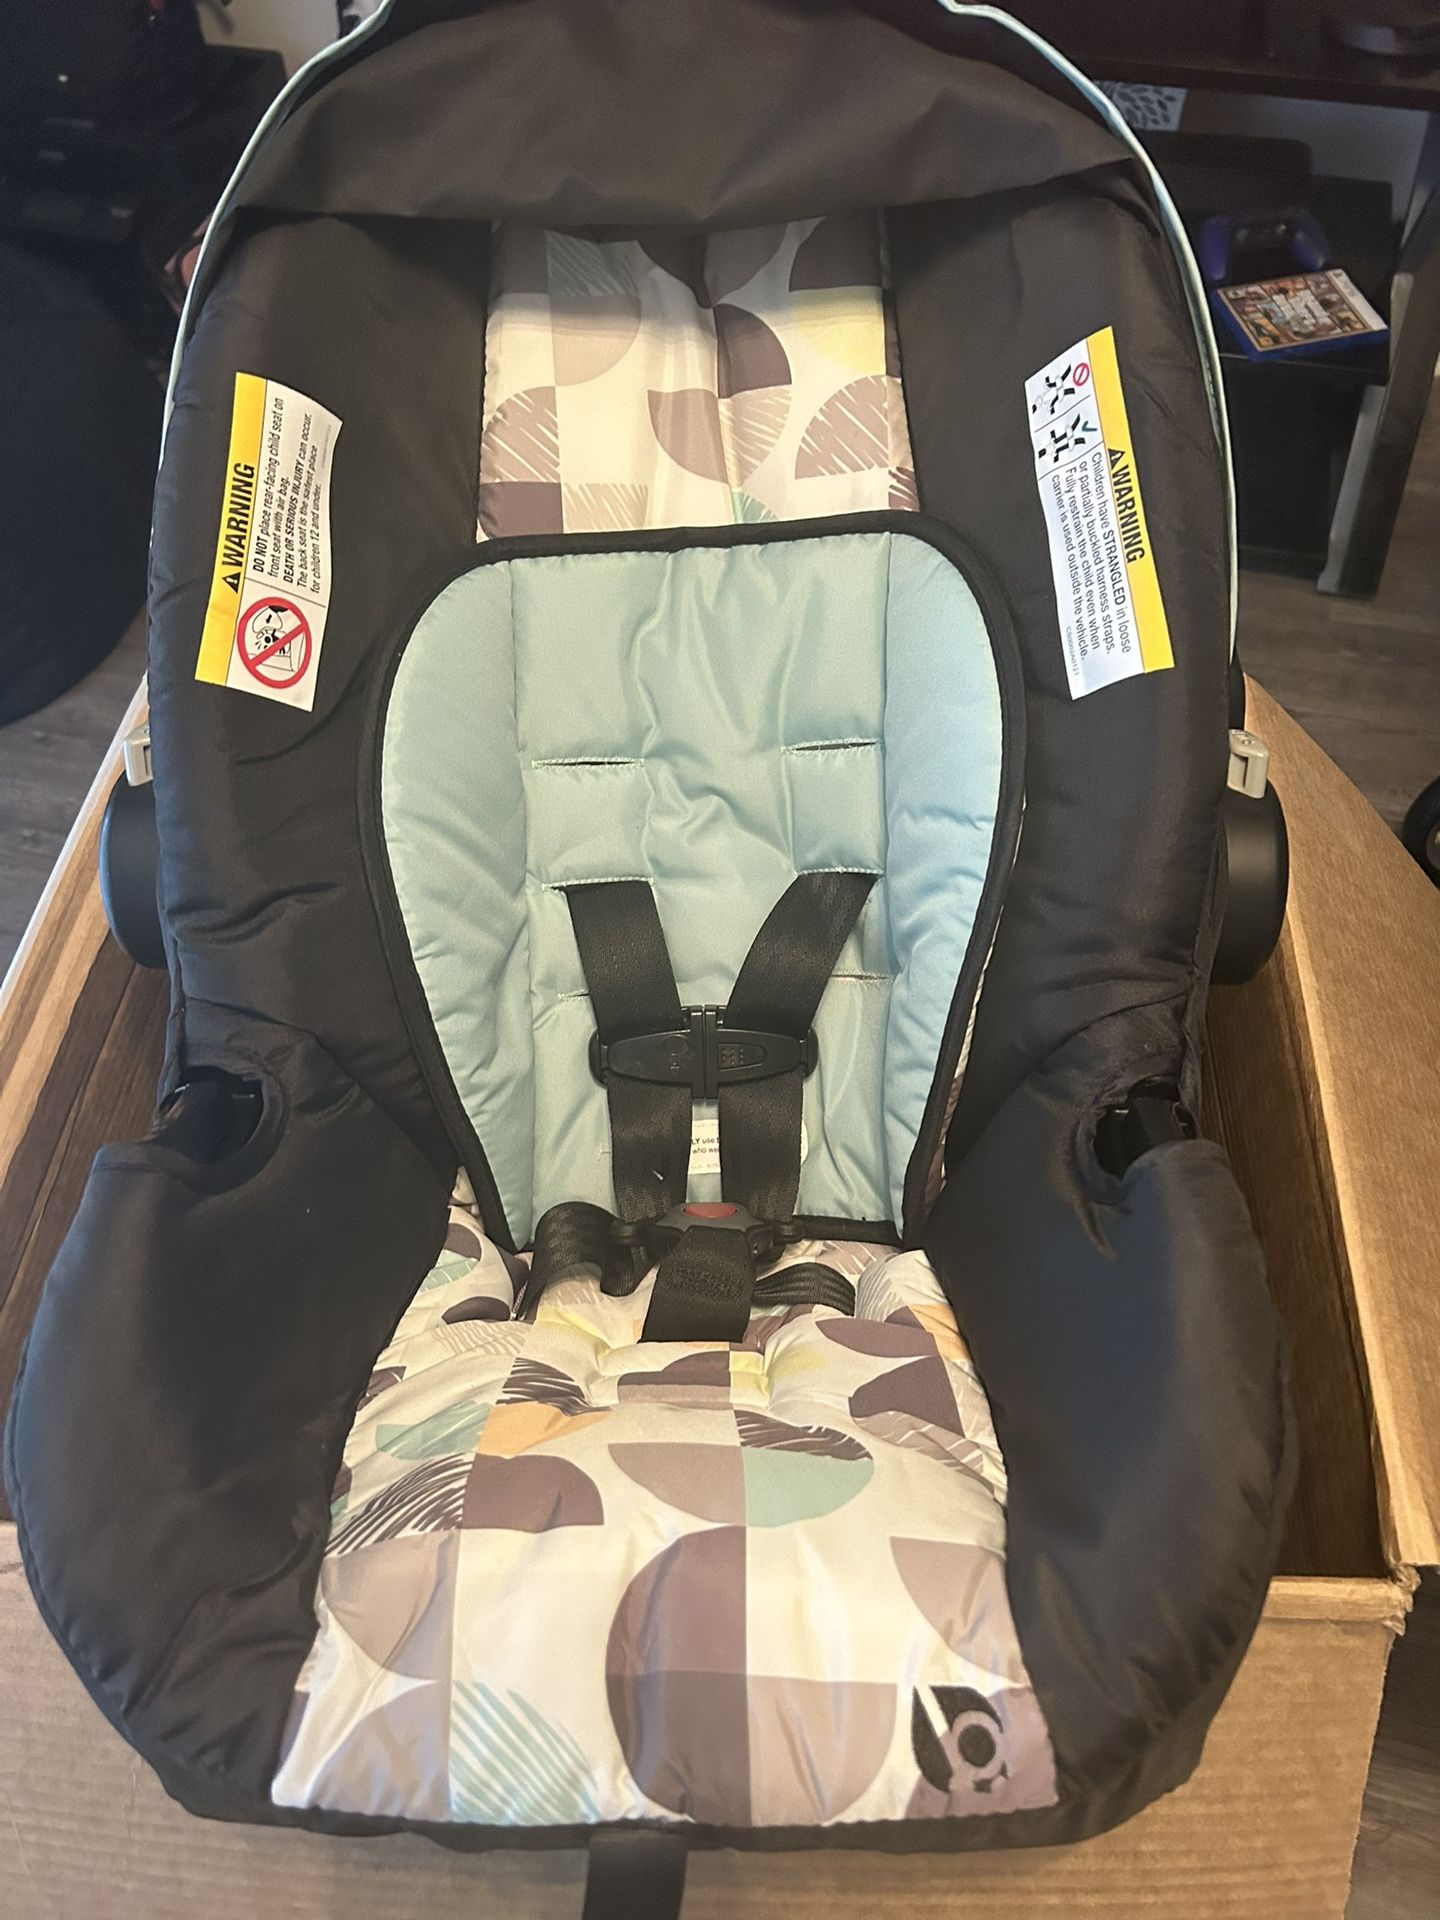 Car seat And stroller